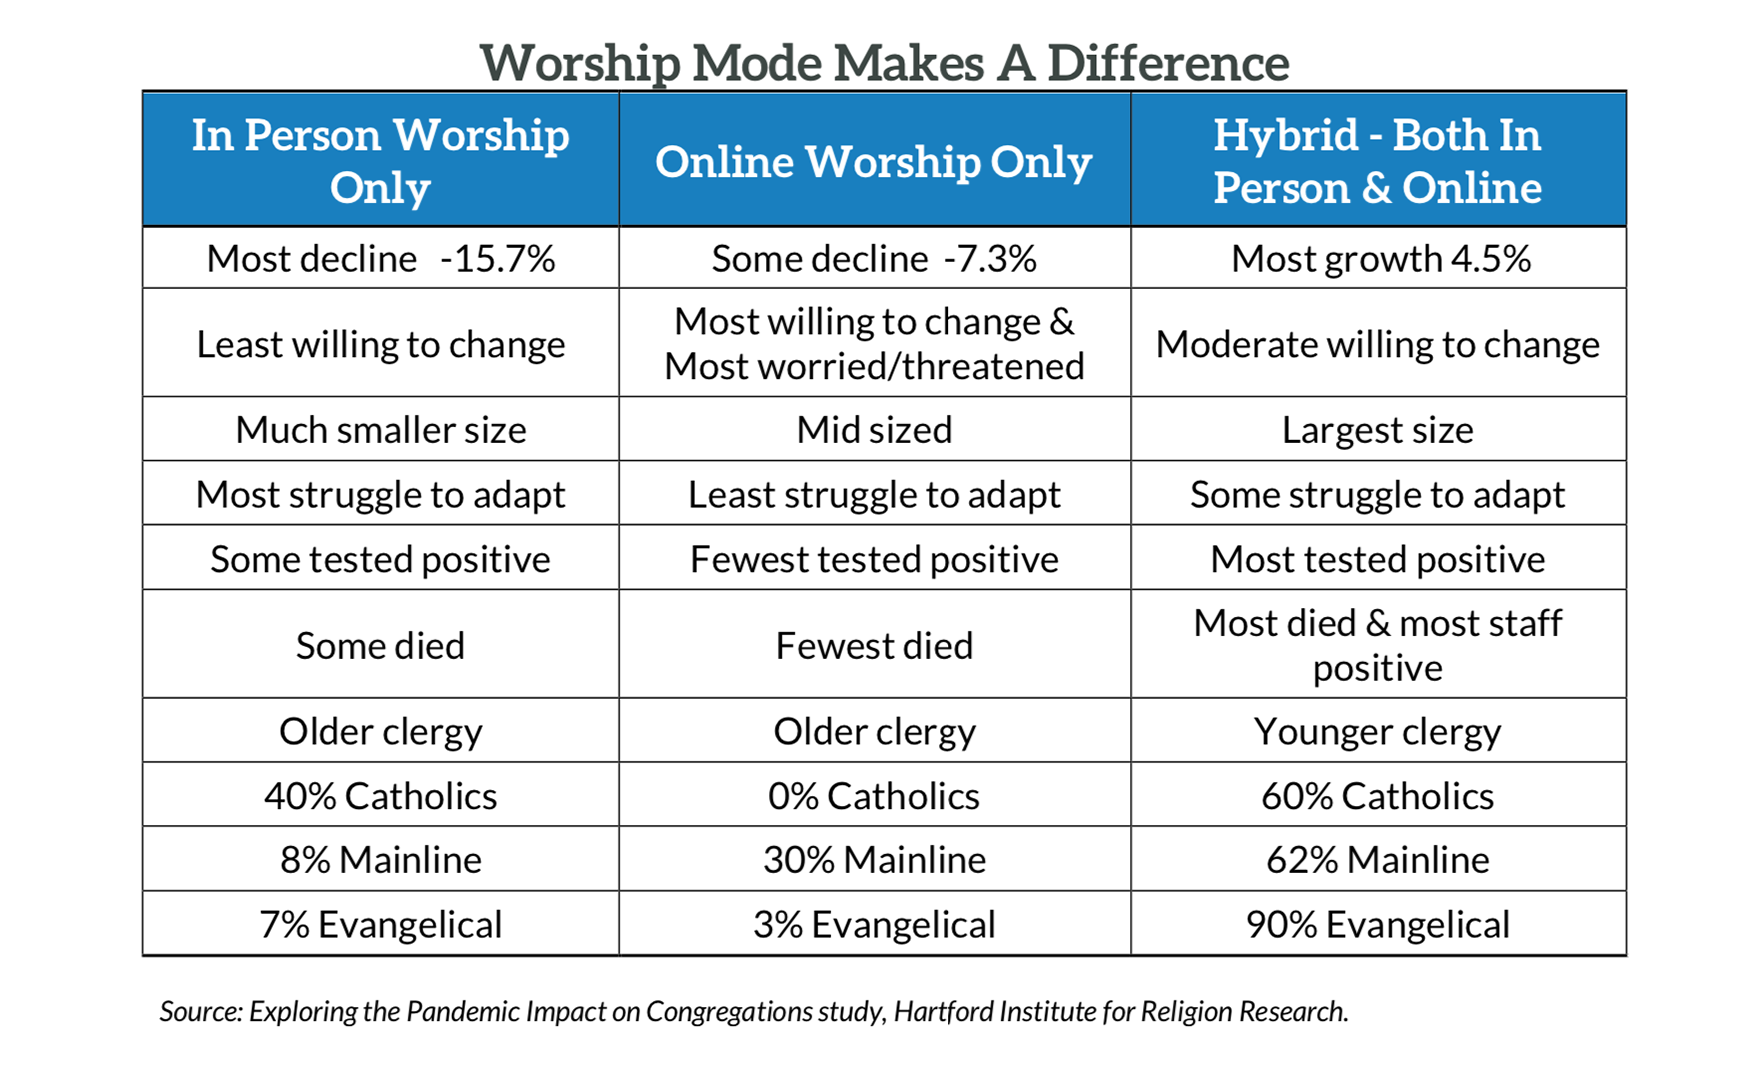 "Worship Mode Makes A Difference" Graphic courtesy of HIRR